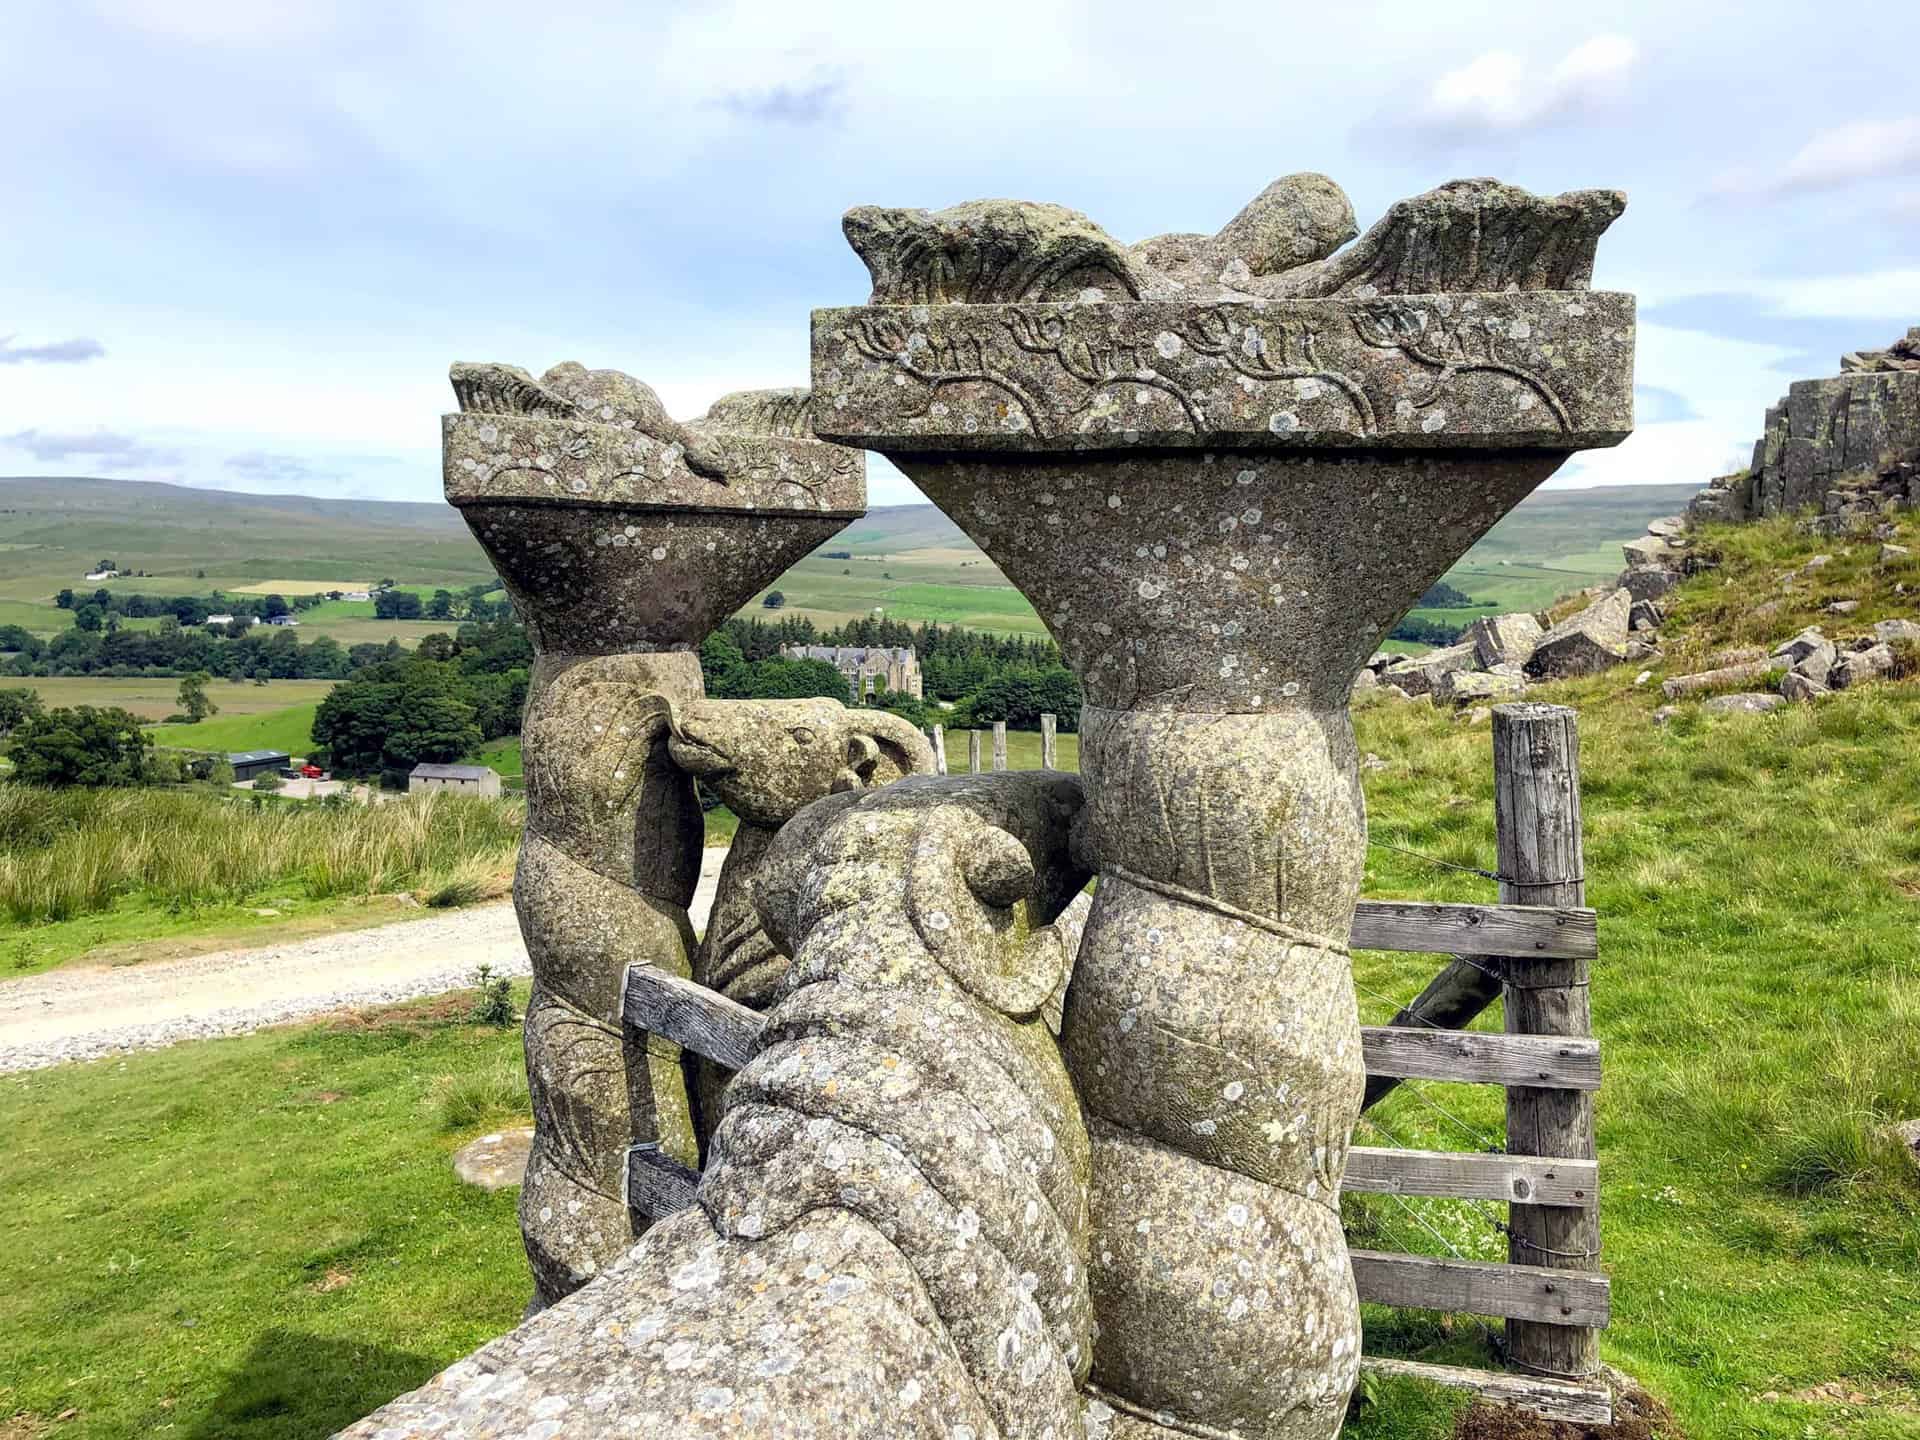 Intricately crafted stone sheep flank a stile near Holwick Scars, blending art with the natural landscape.